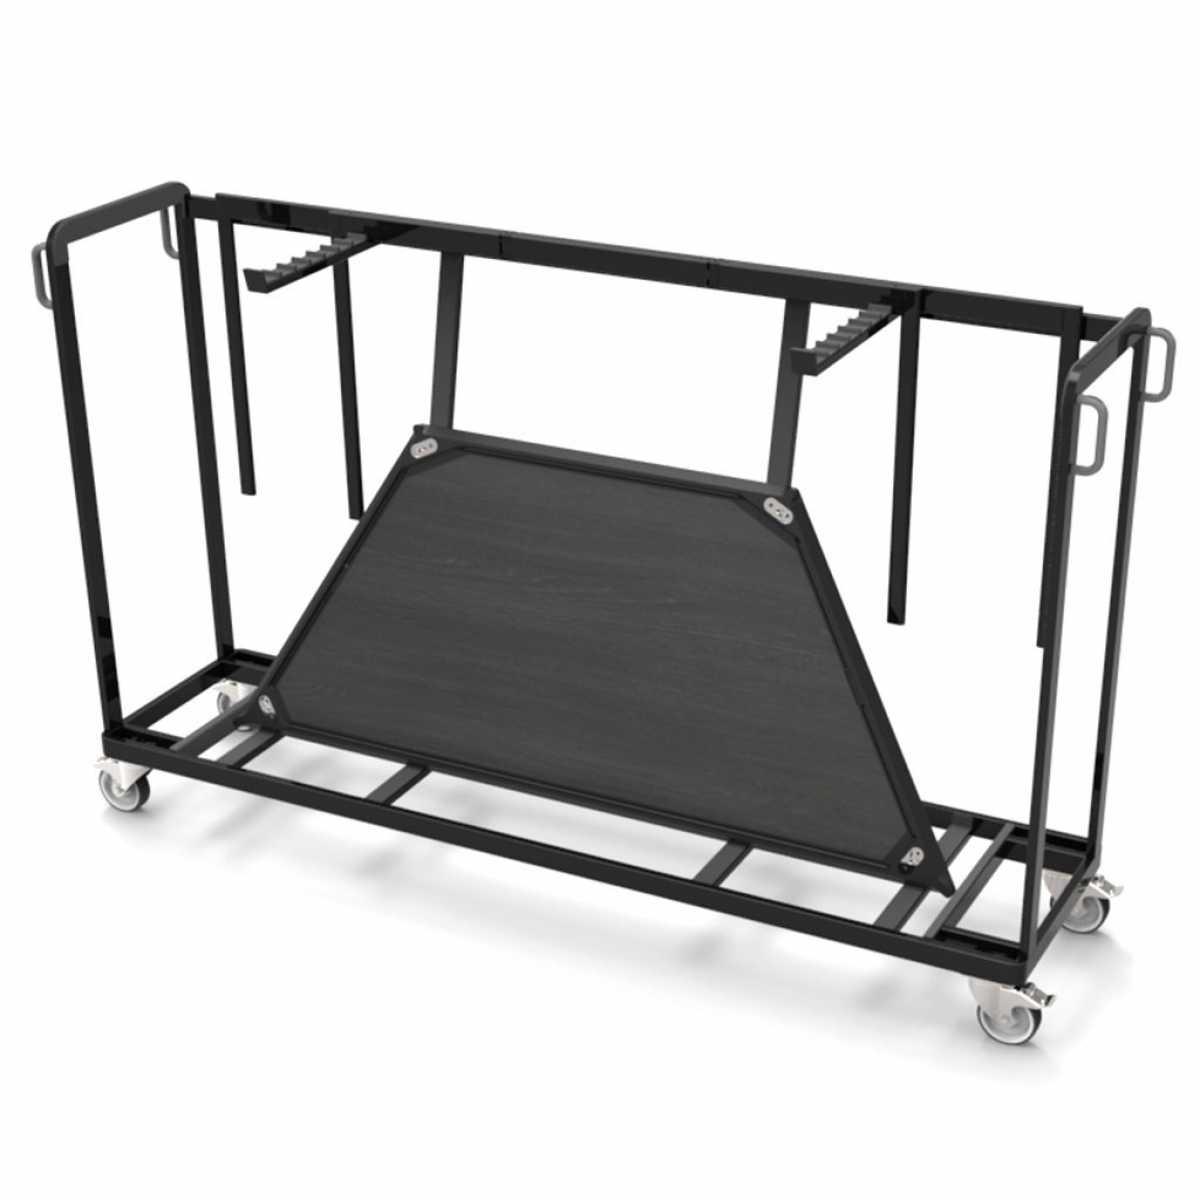 CRASTER 1800 Trapezoid – Trolley